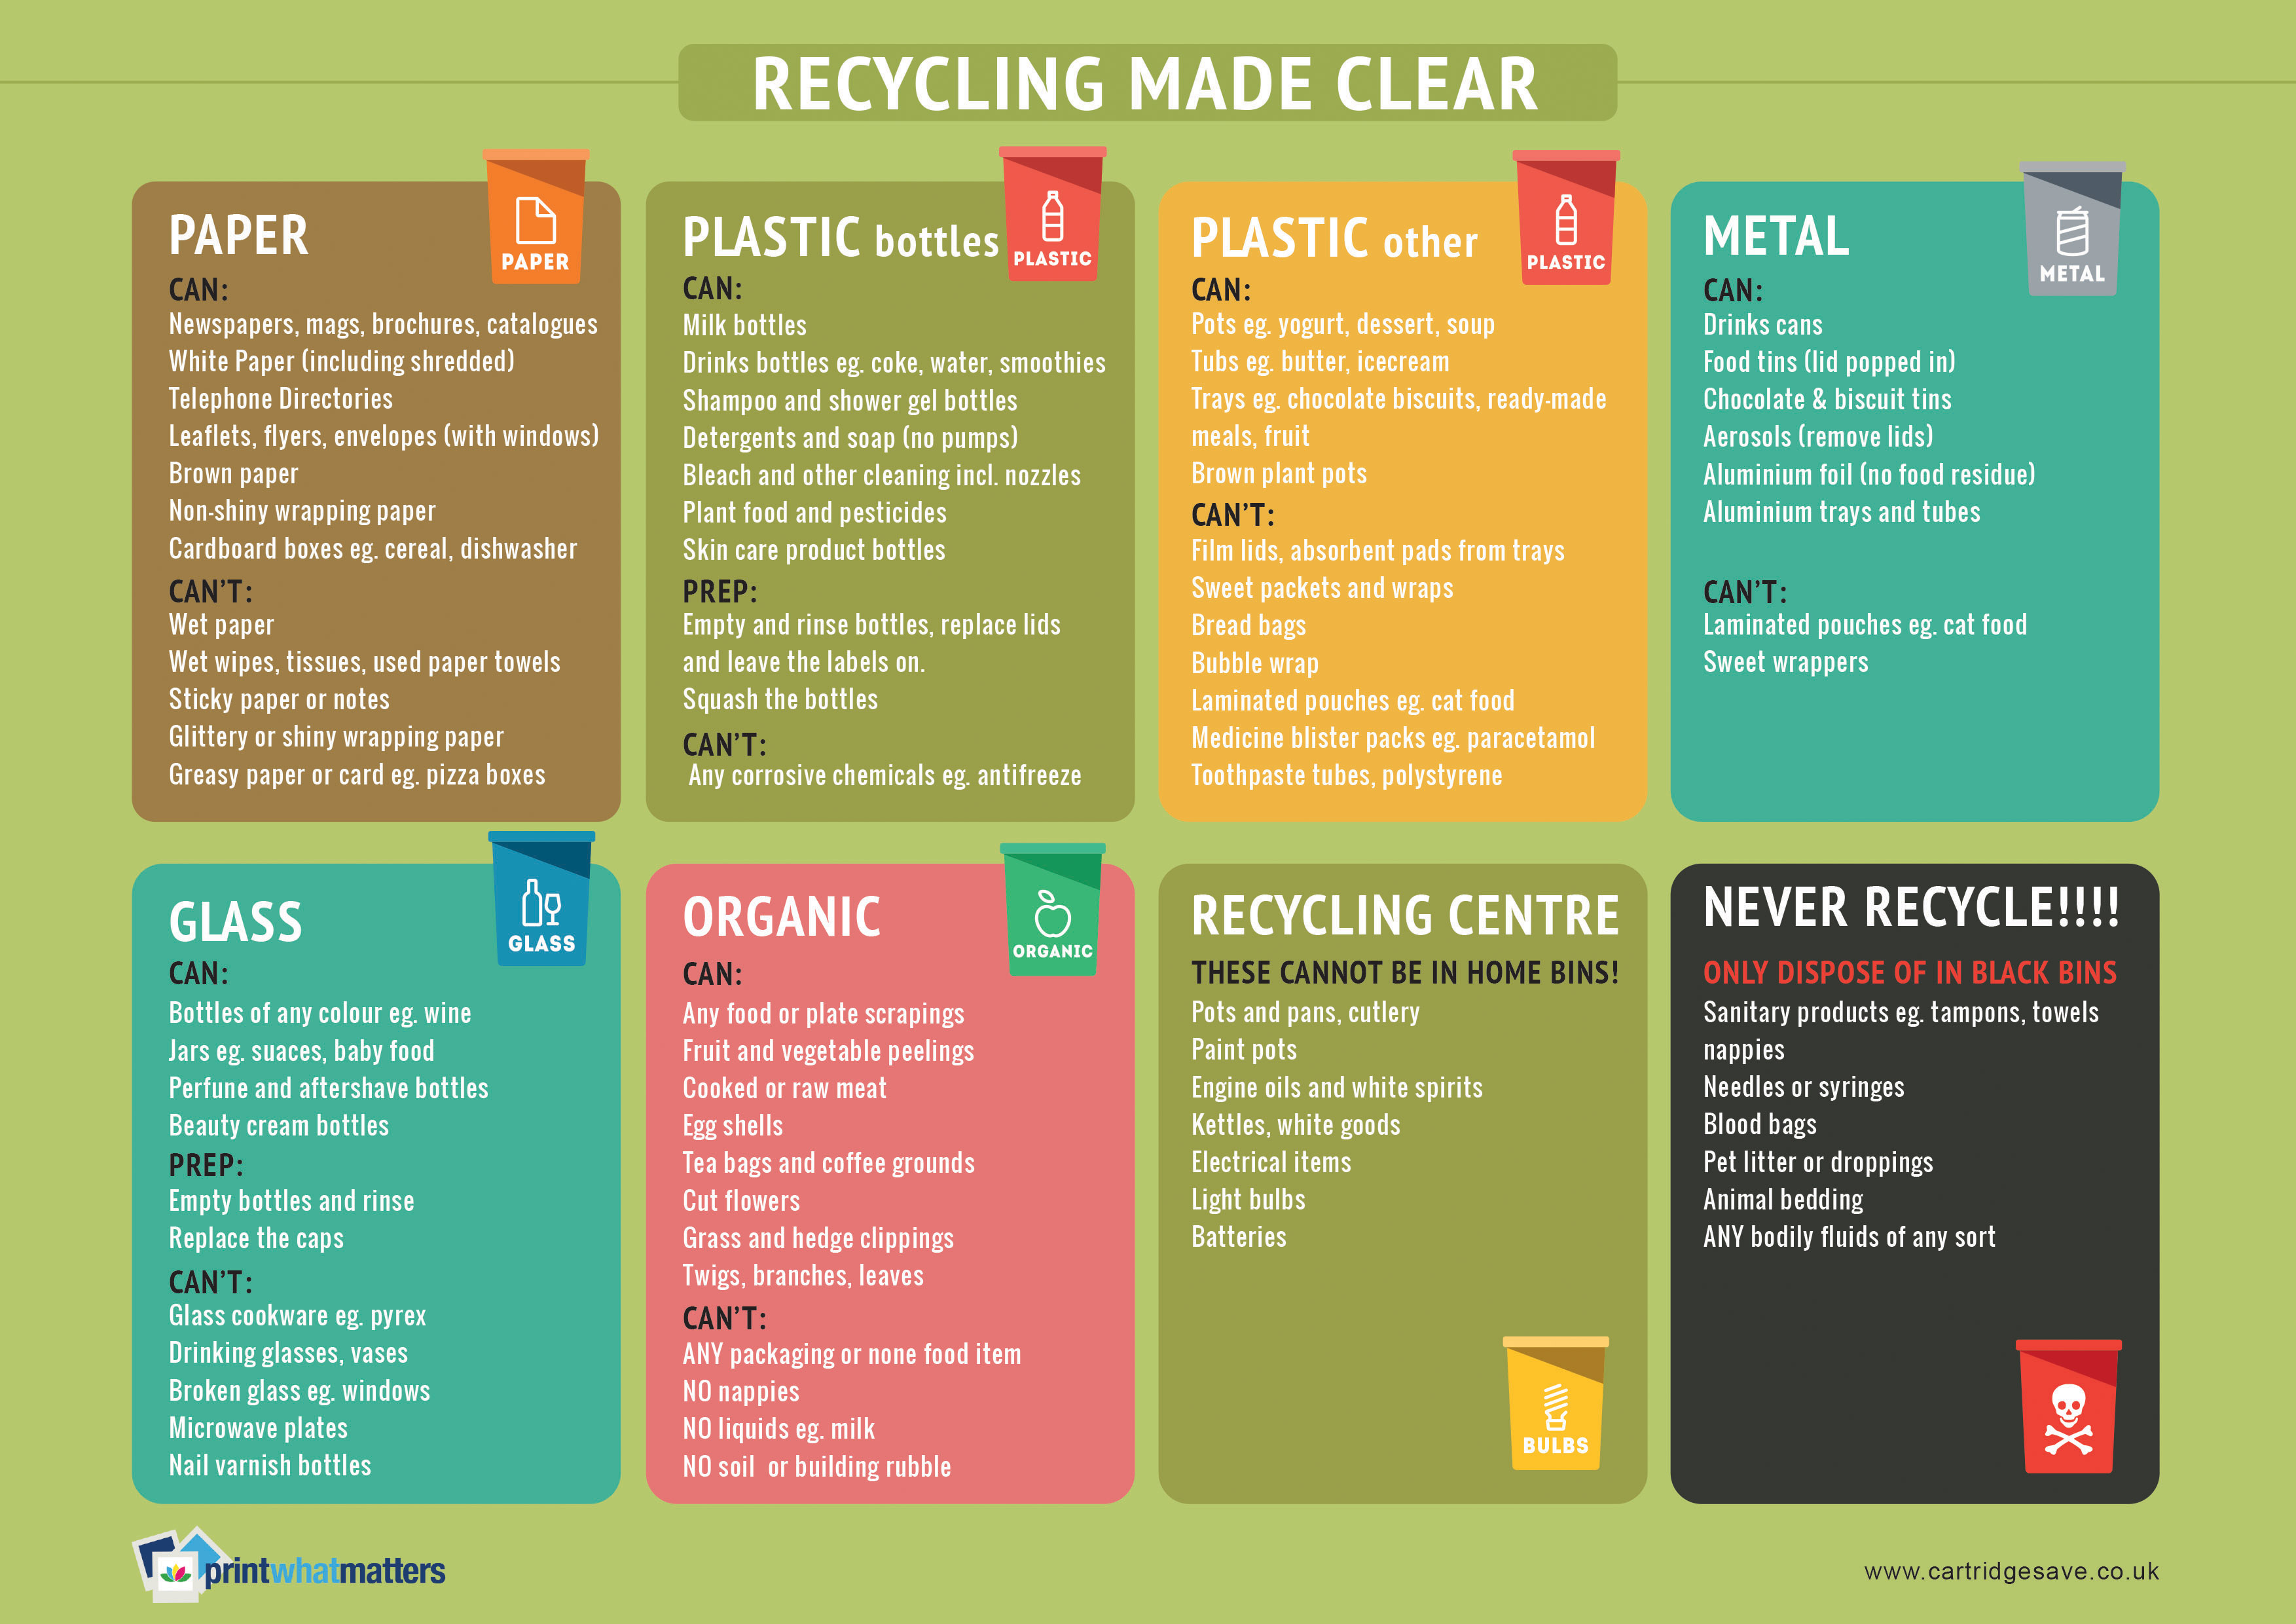 Use them again. Recycling перевод. Recycling article. Recycling in Foreign Countries. Listening. Recycling.